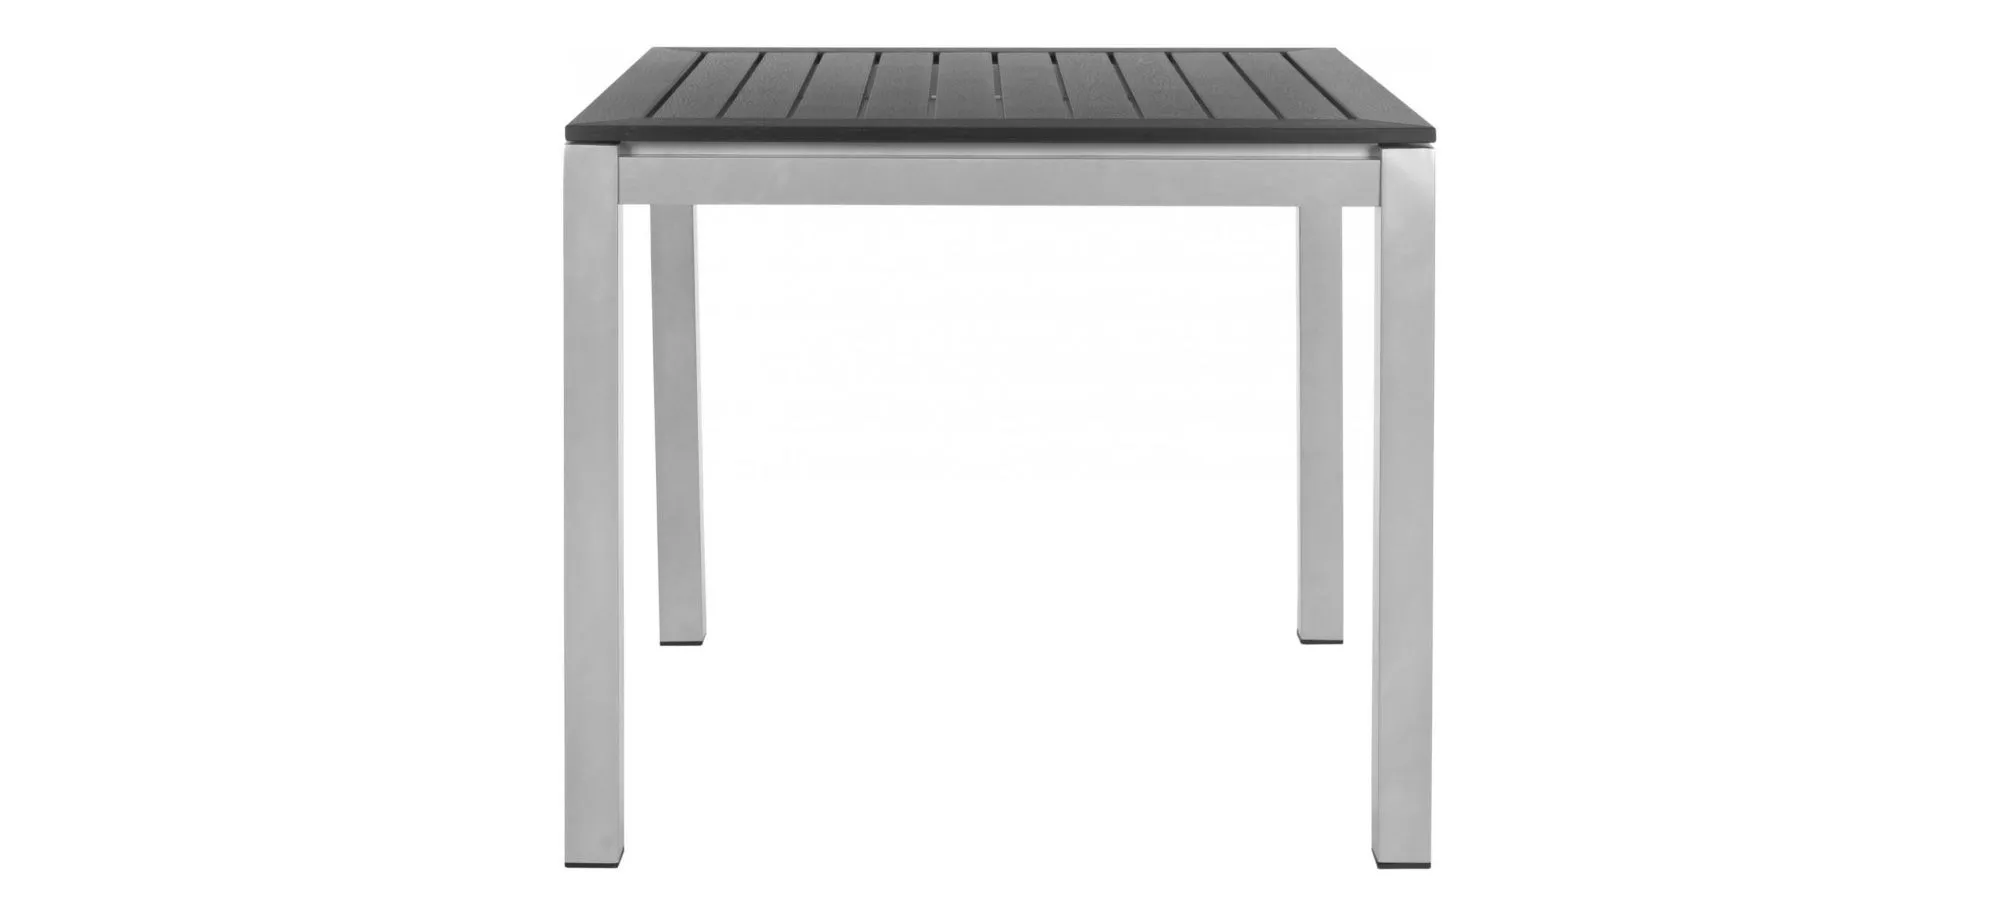 Onika Outdoor Accent Table in Black by Safavieh